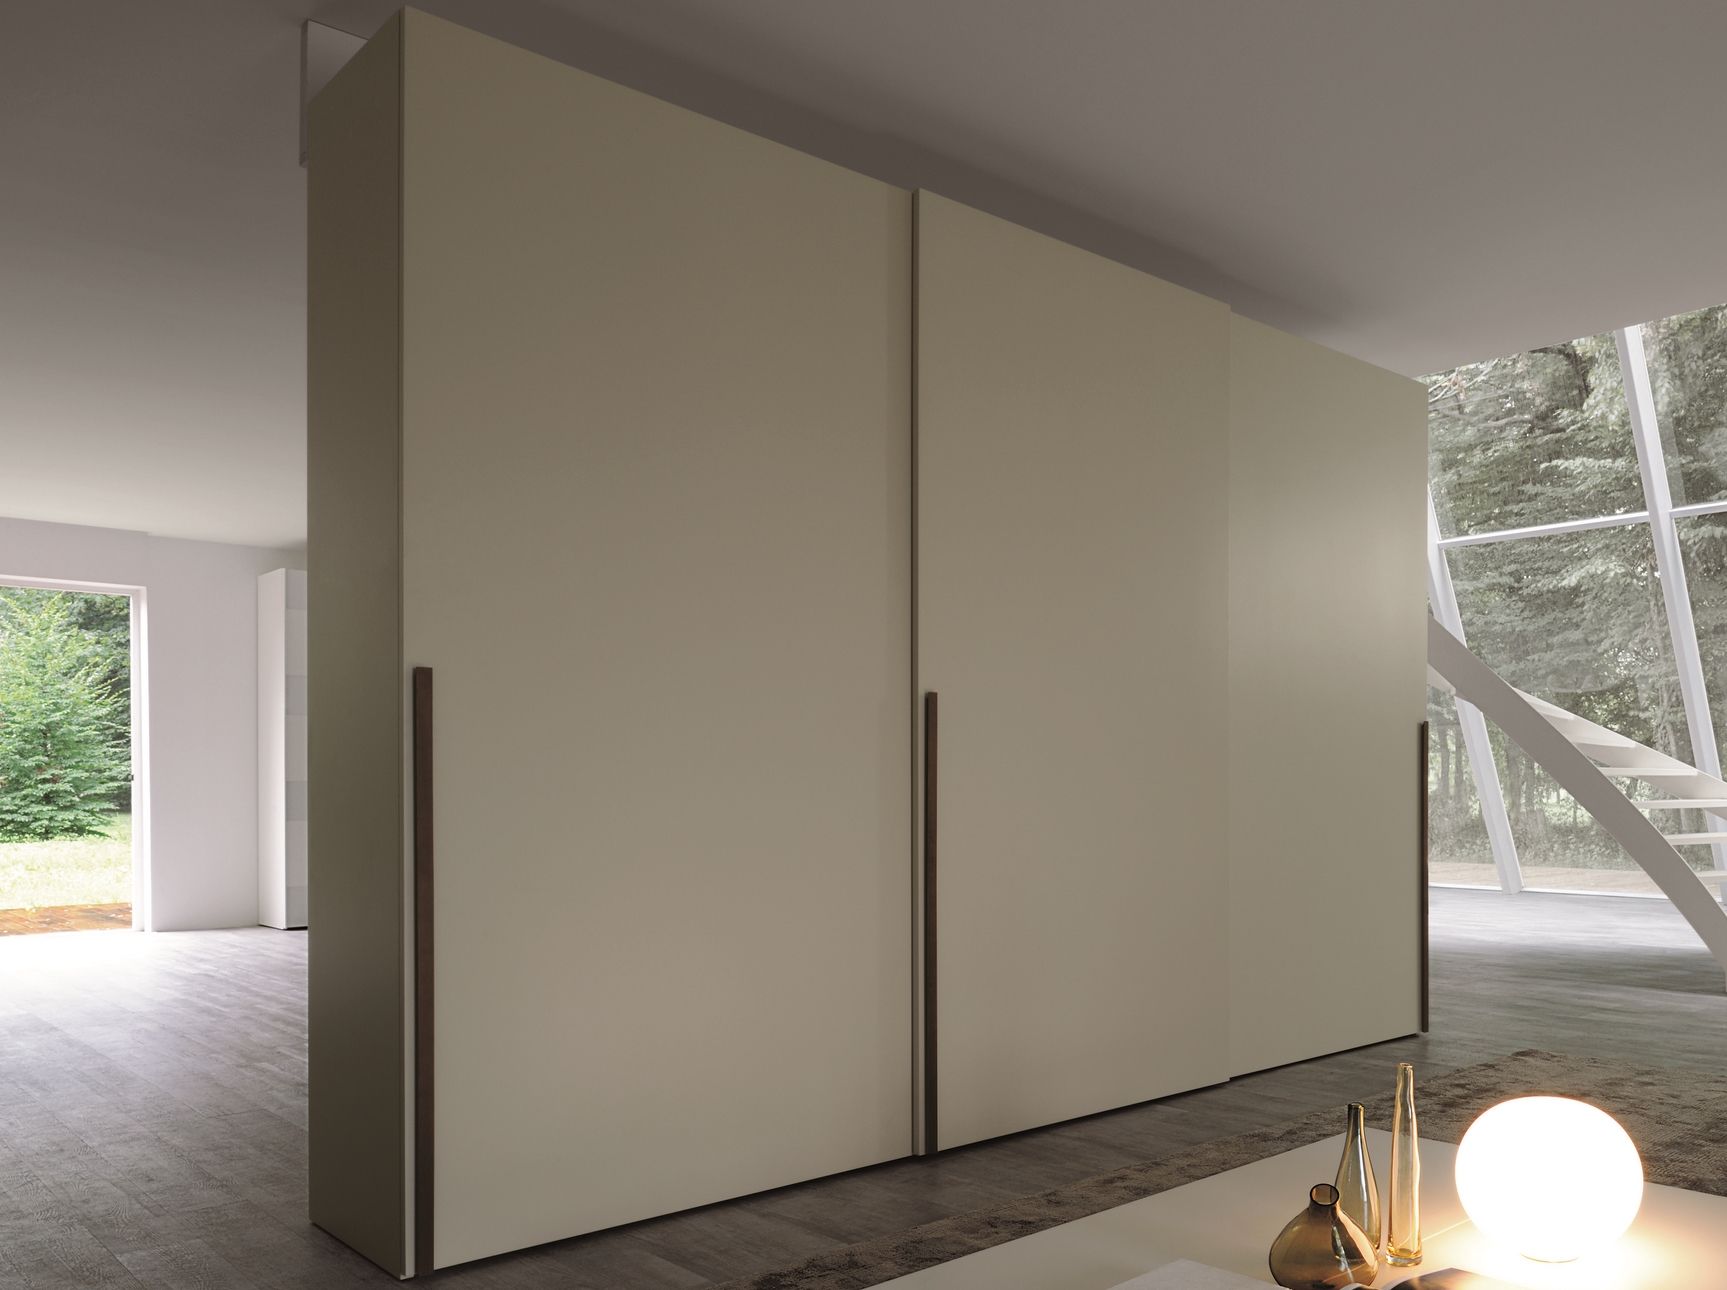 The Benefits of Fitted Wardrobes with Sliding Doors